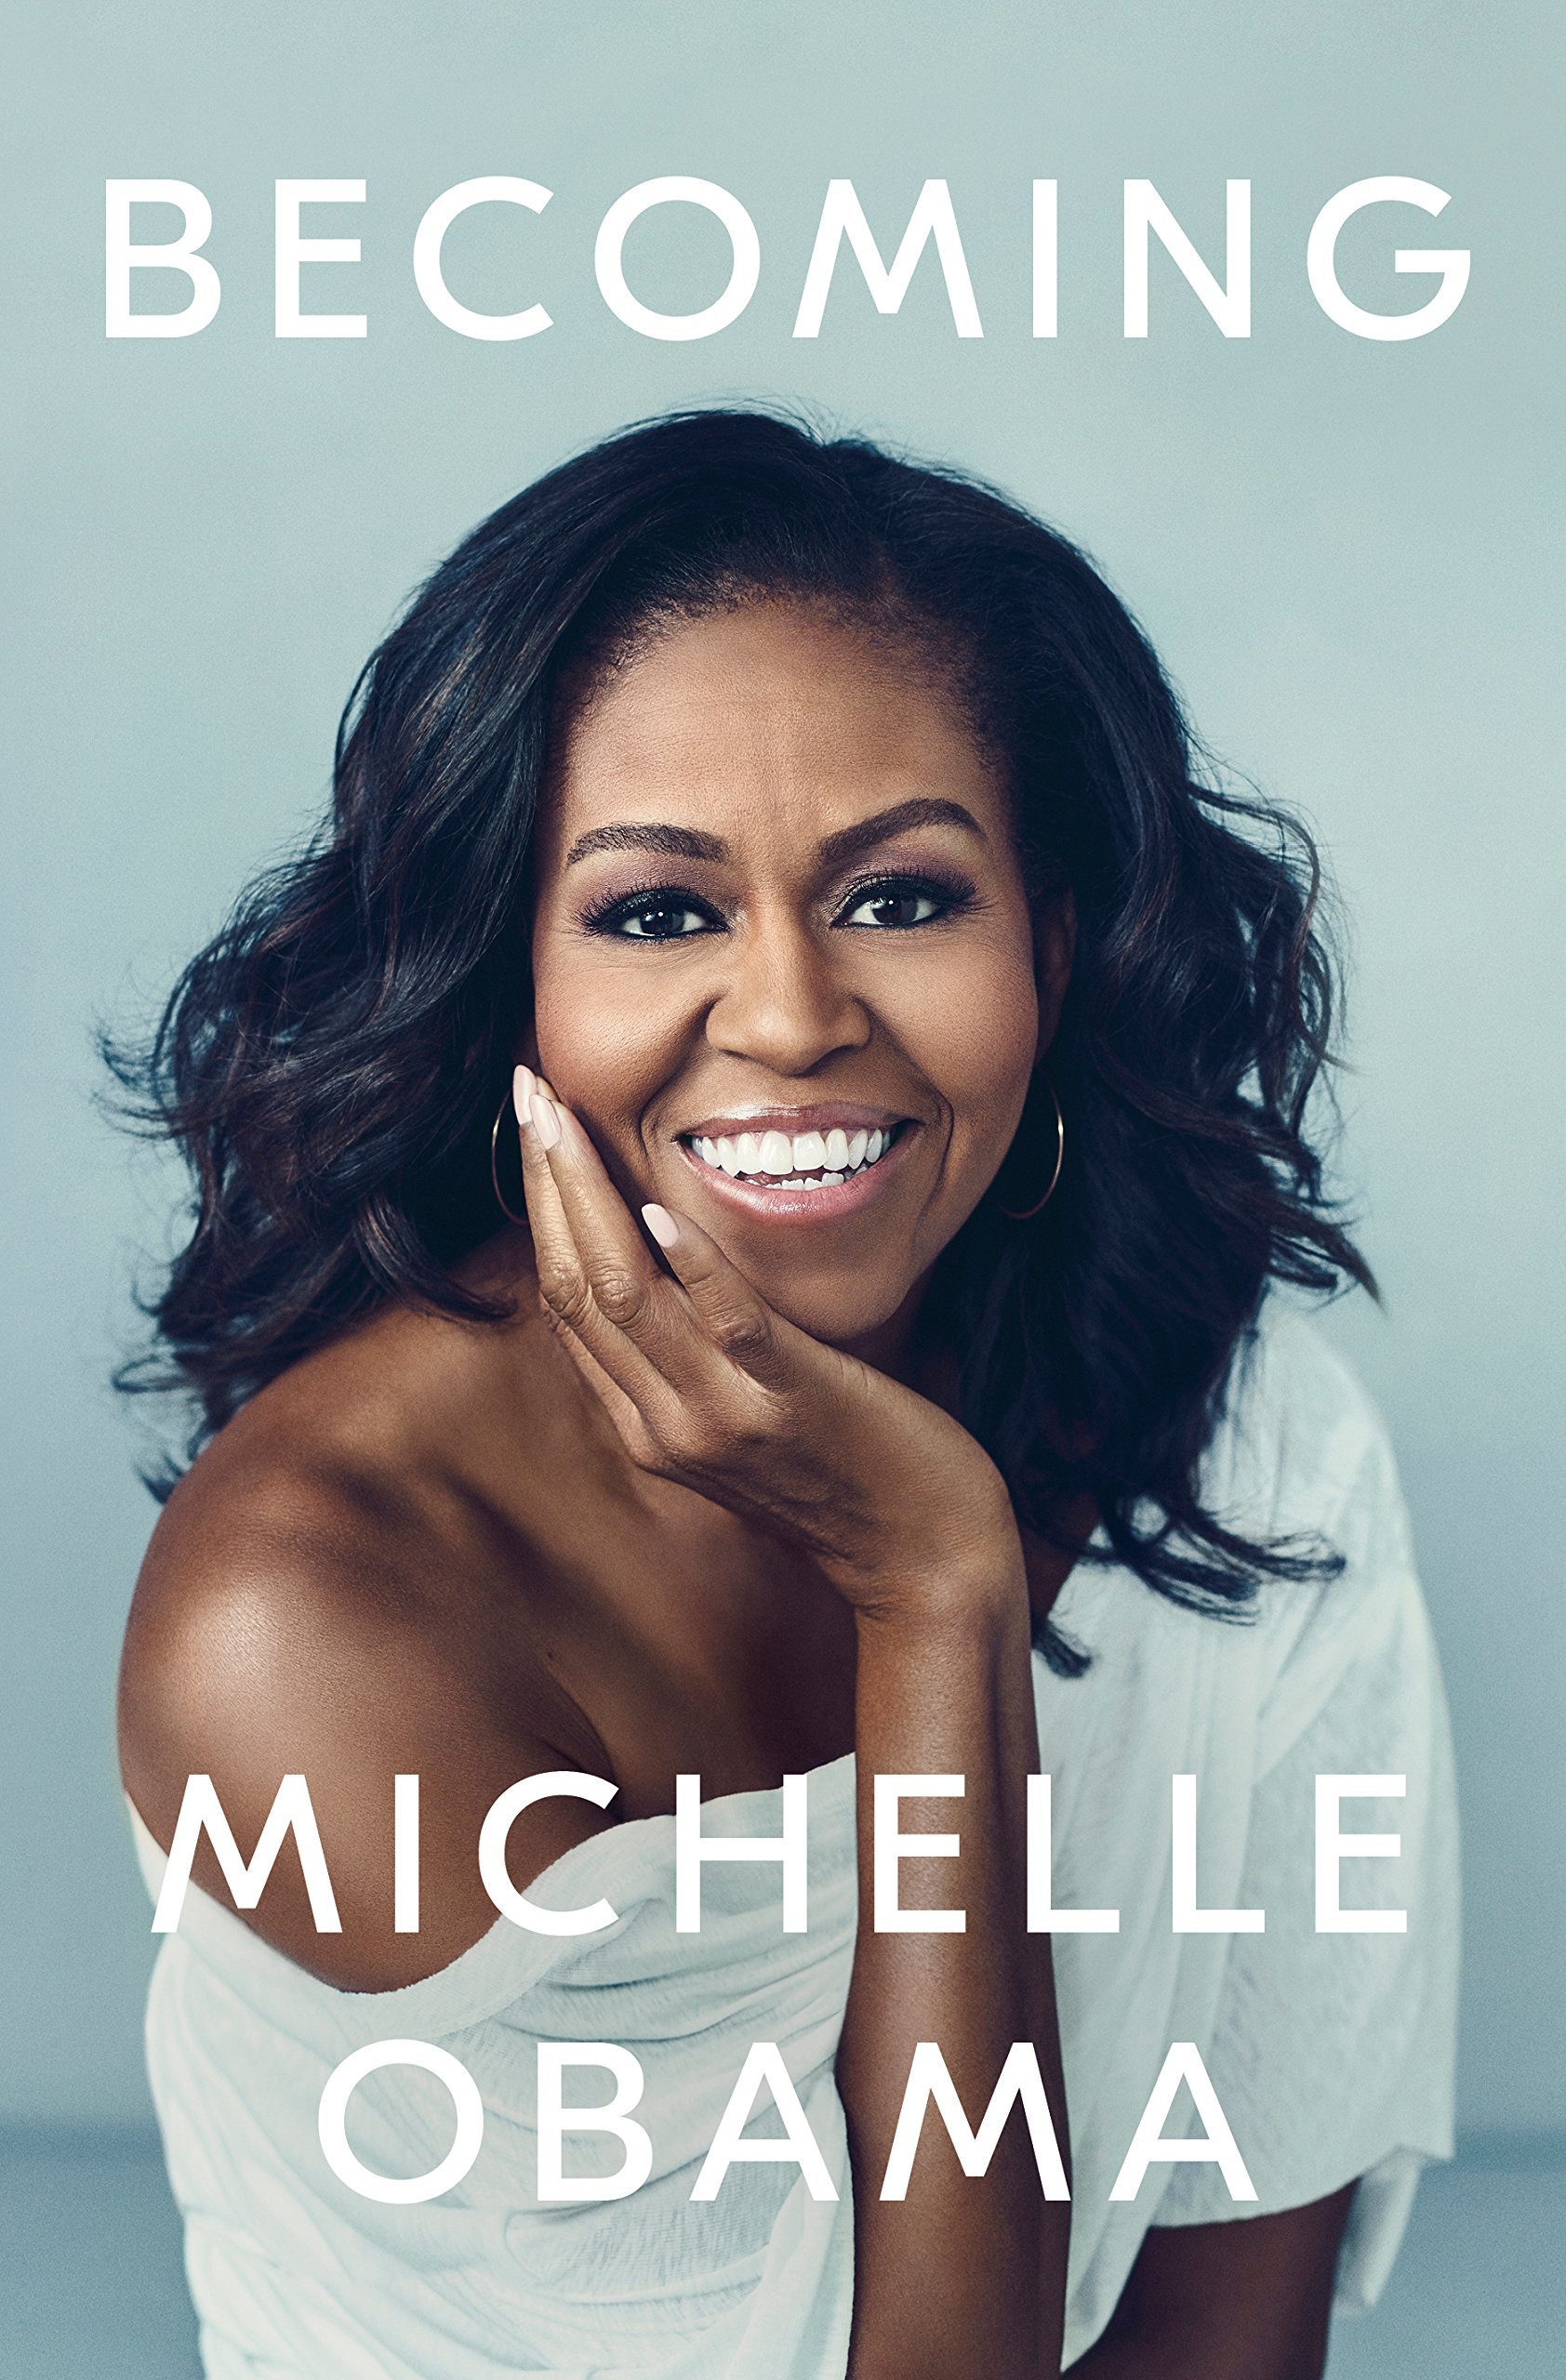 Book Cover of Becoming by Michelle Obama